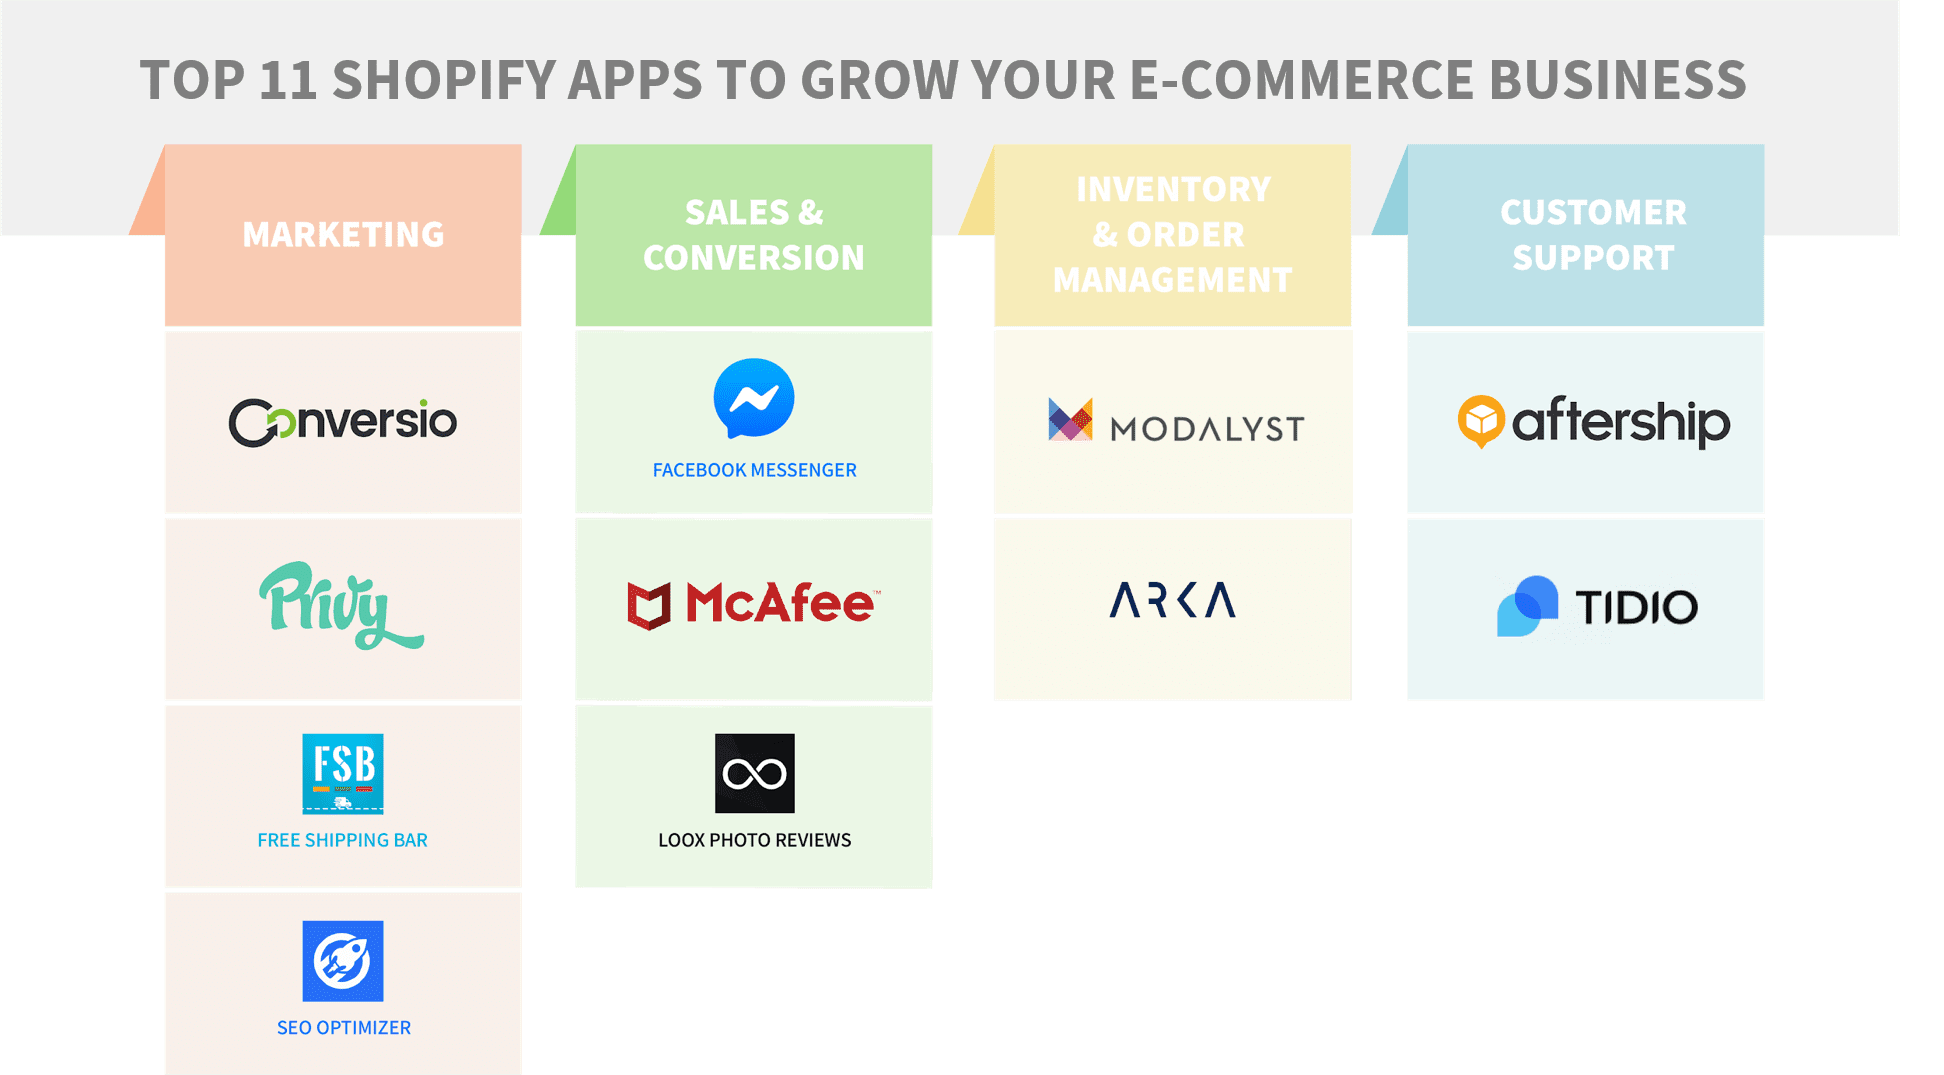 Top 11 shopify apps to grow e-commerce business